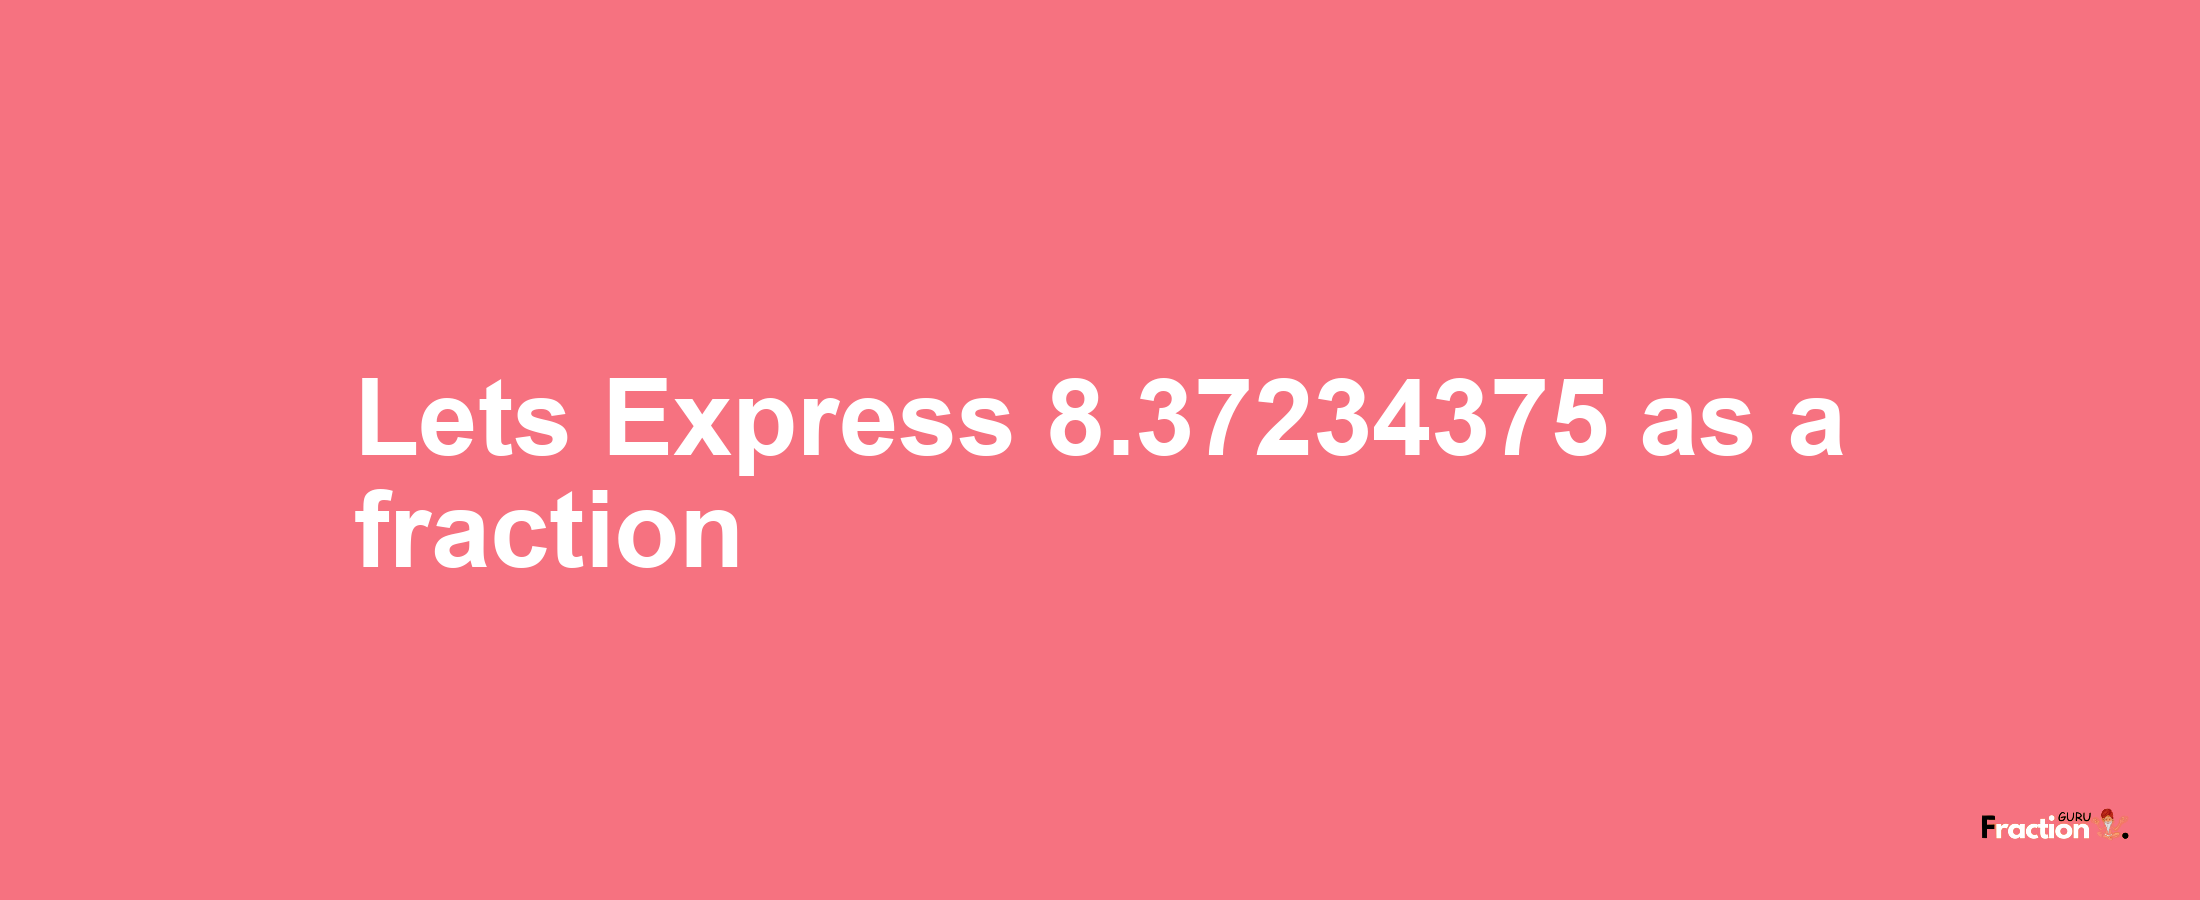 Lets Express 8.37234375 as afraction